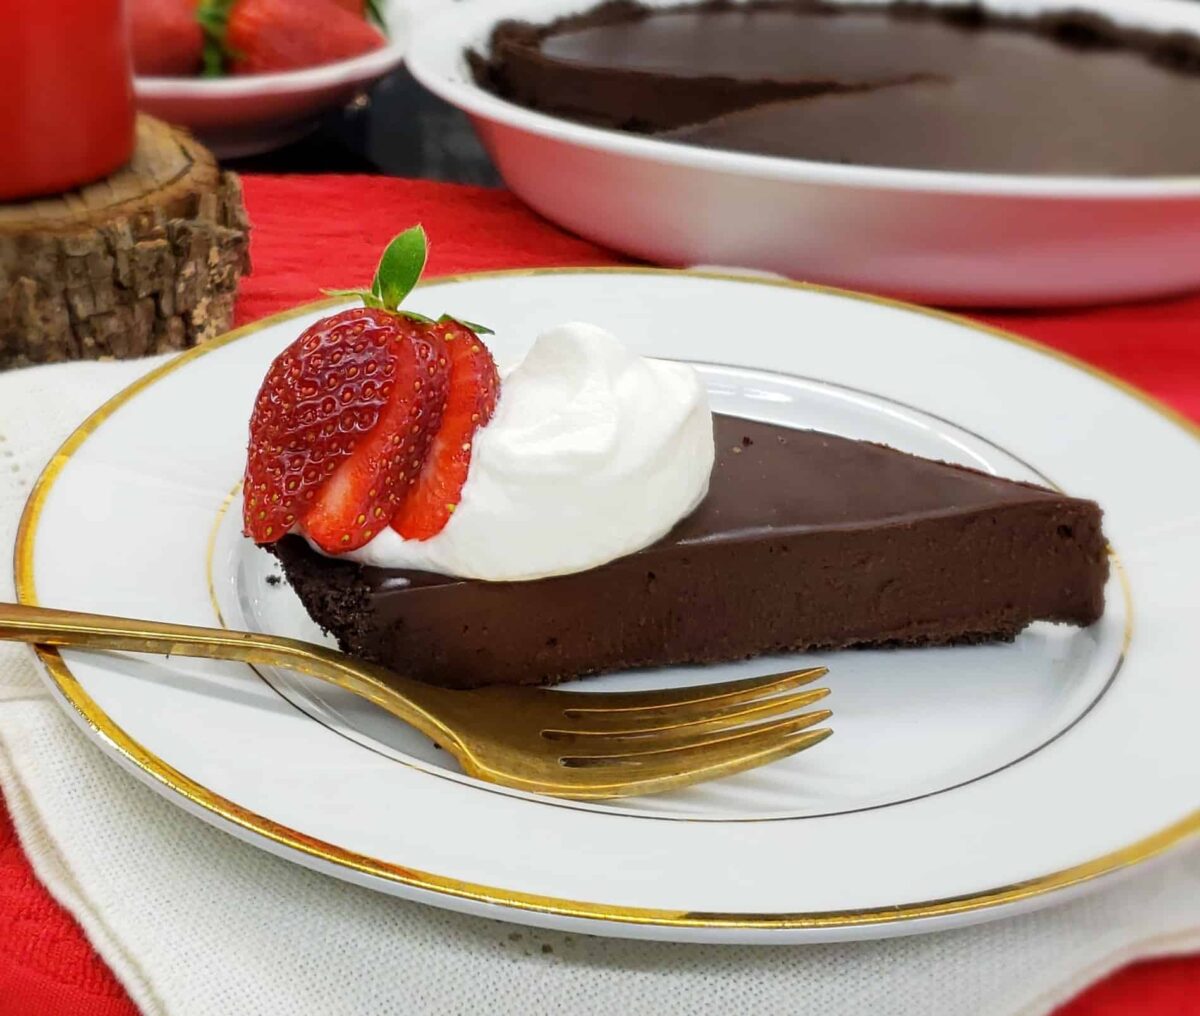 Shortcut Chocolate Truffle Tart is easy as pie...and tastes even better! 4 ingredients and 5 minutes to prep served with whipped cream, a strawberry. Served on white china with gold trim and a gold fork.